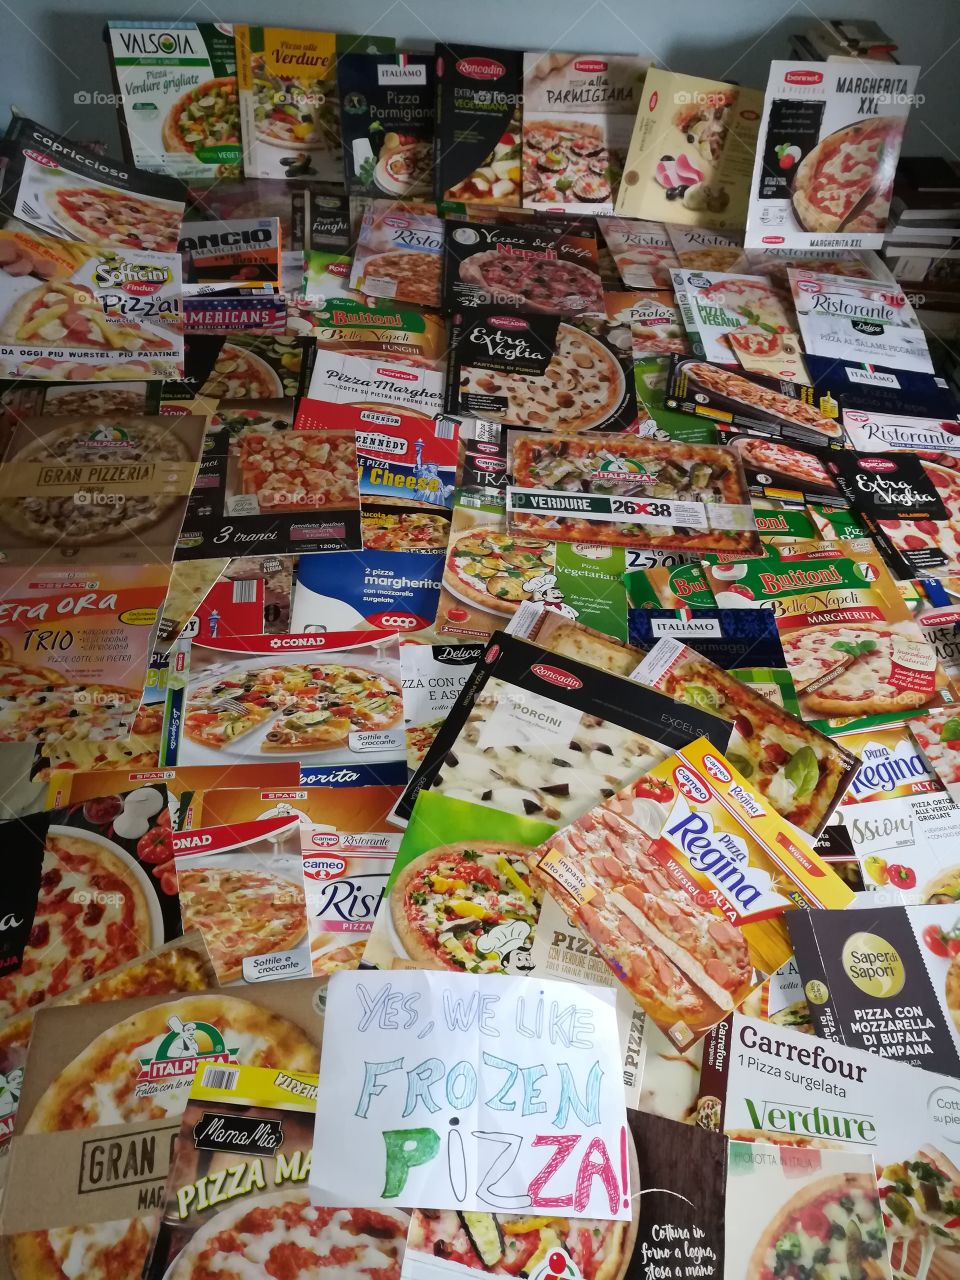 My collection: more than 100 frozen pizza cartons. Yes, we like frozen pizza! (vertical version)